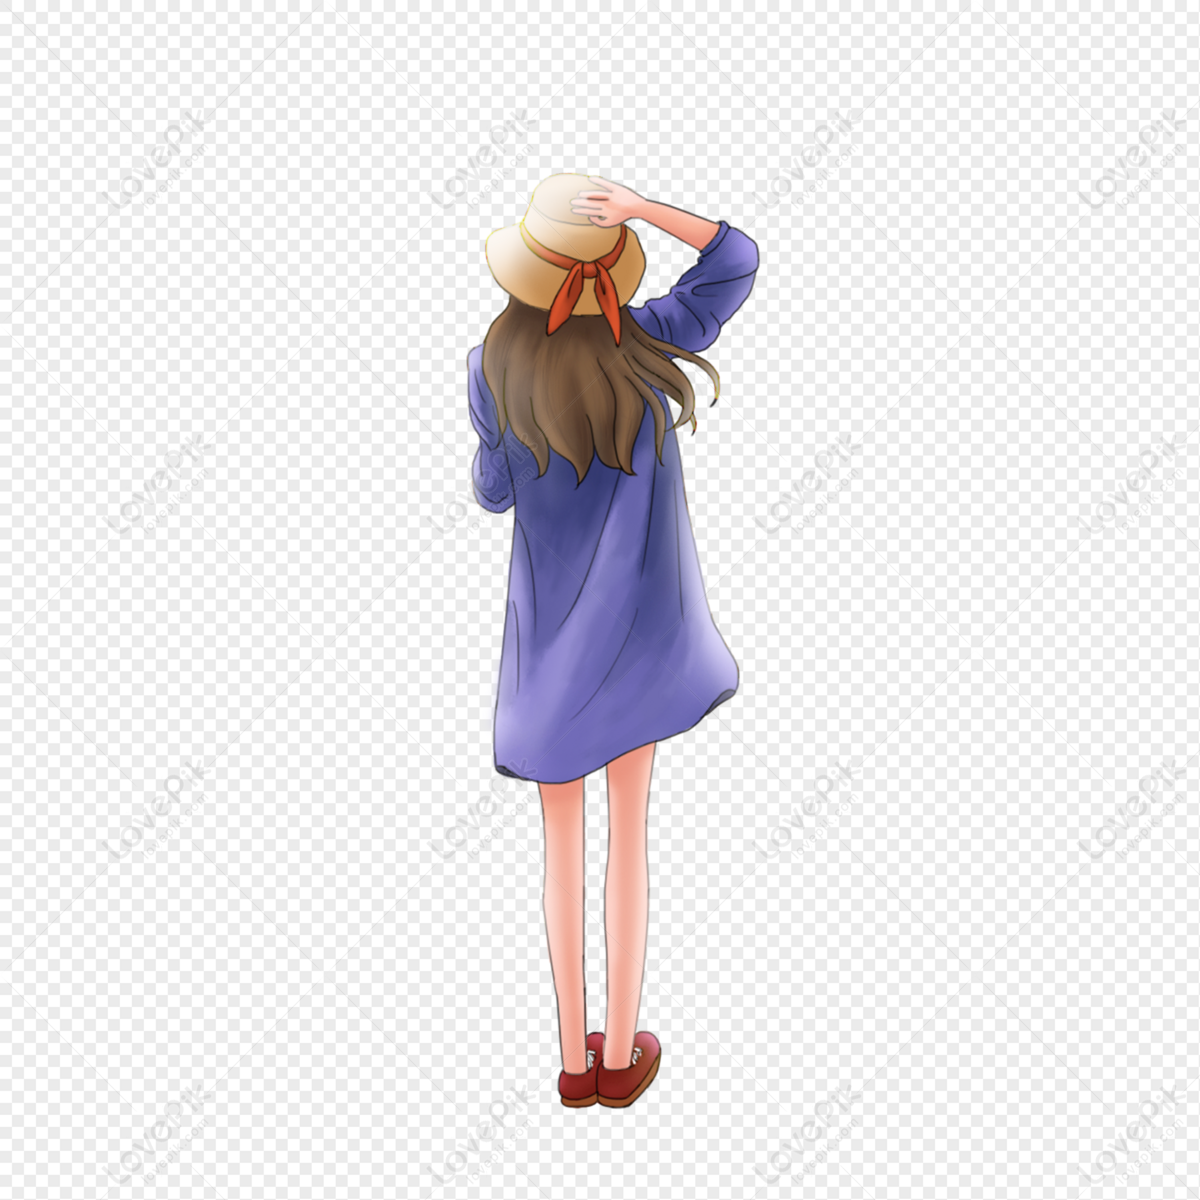 Girl Back View On Vacation PNG Image Free Download And Clipart Image For  Free Download - Lovepik | 401760151